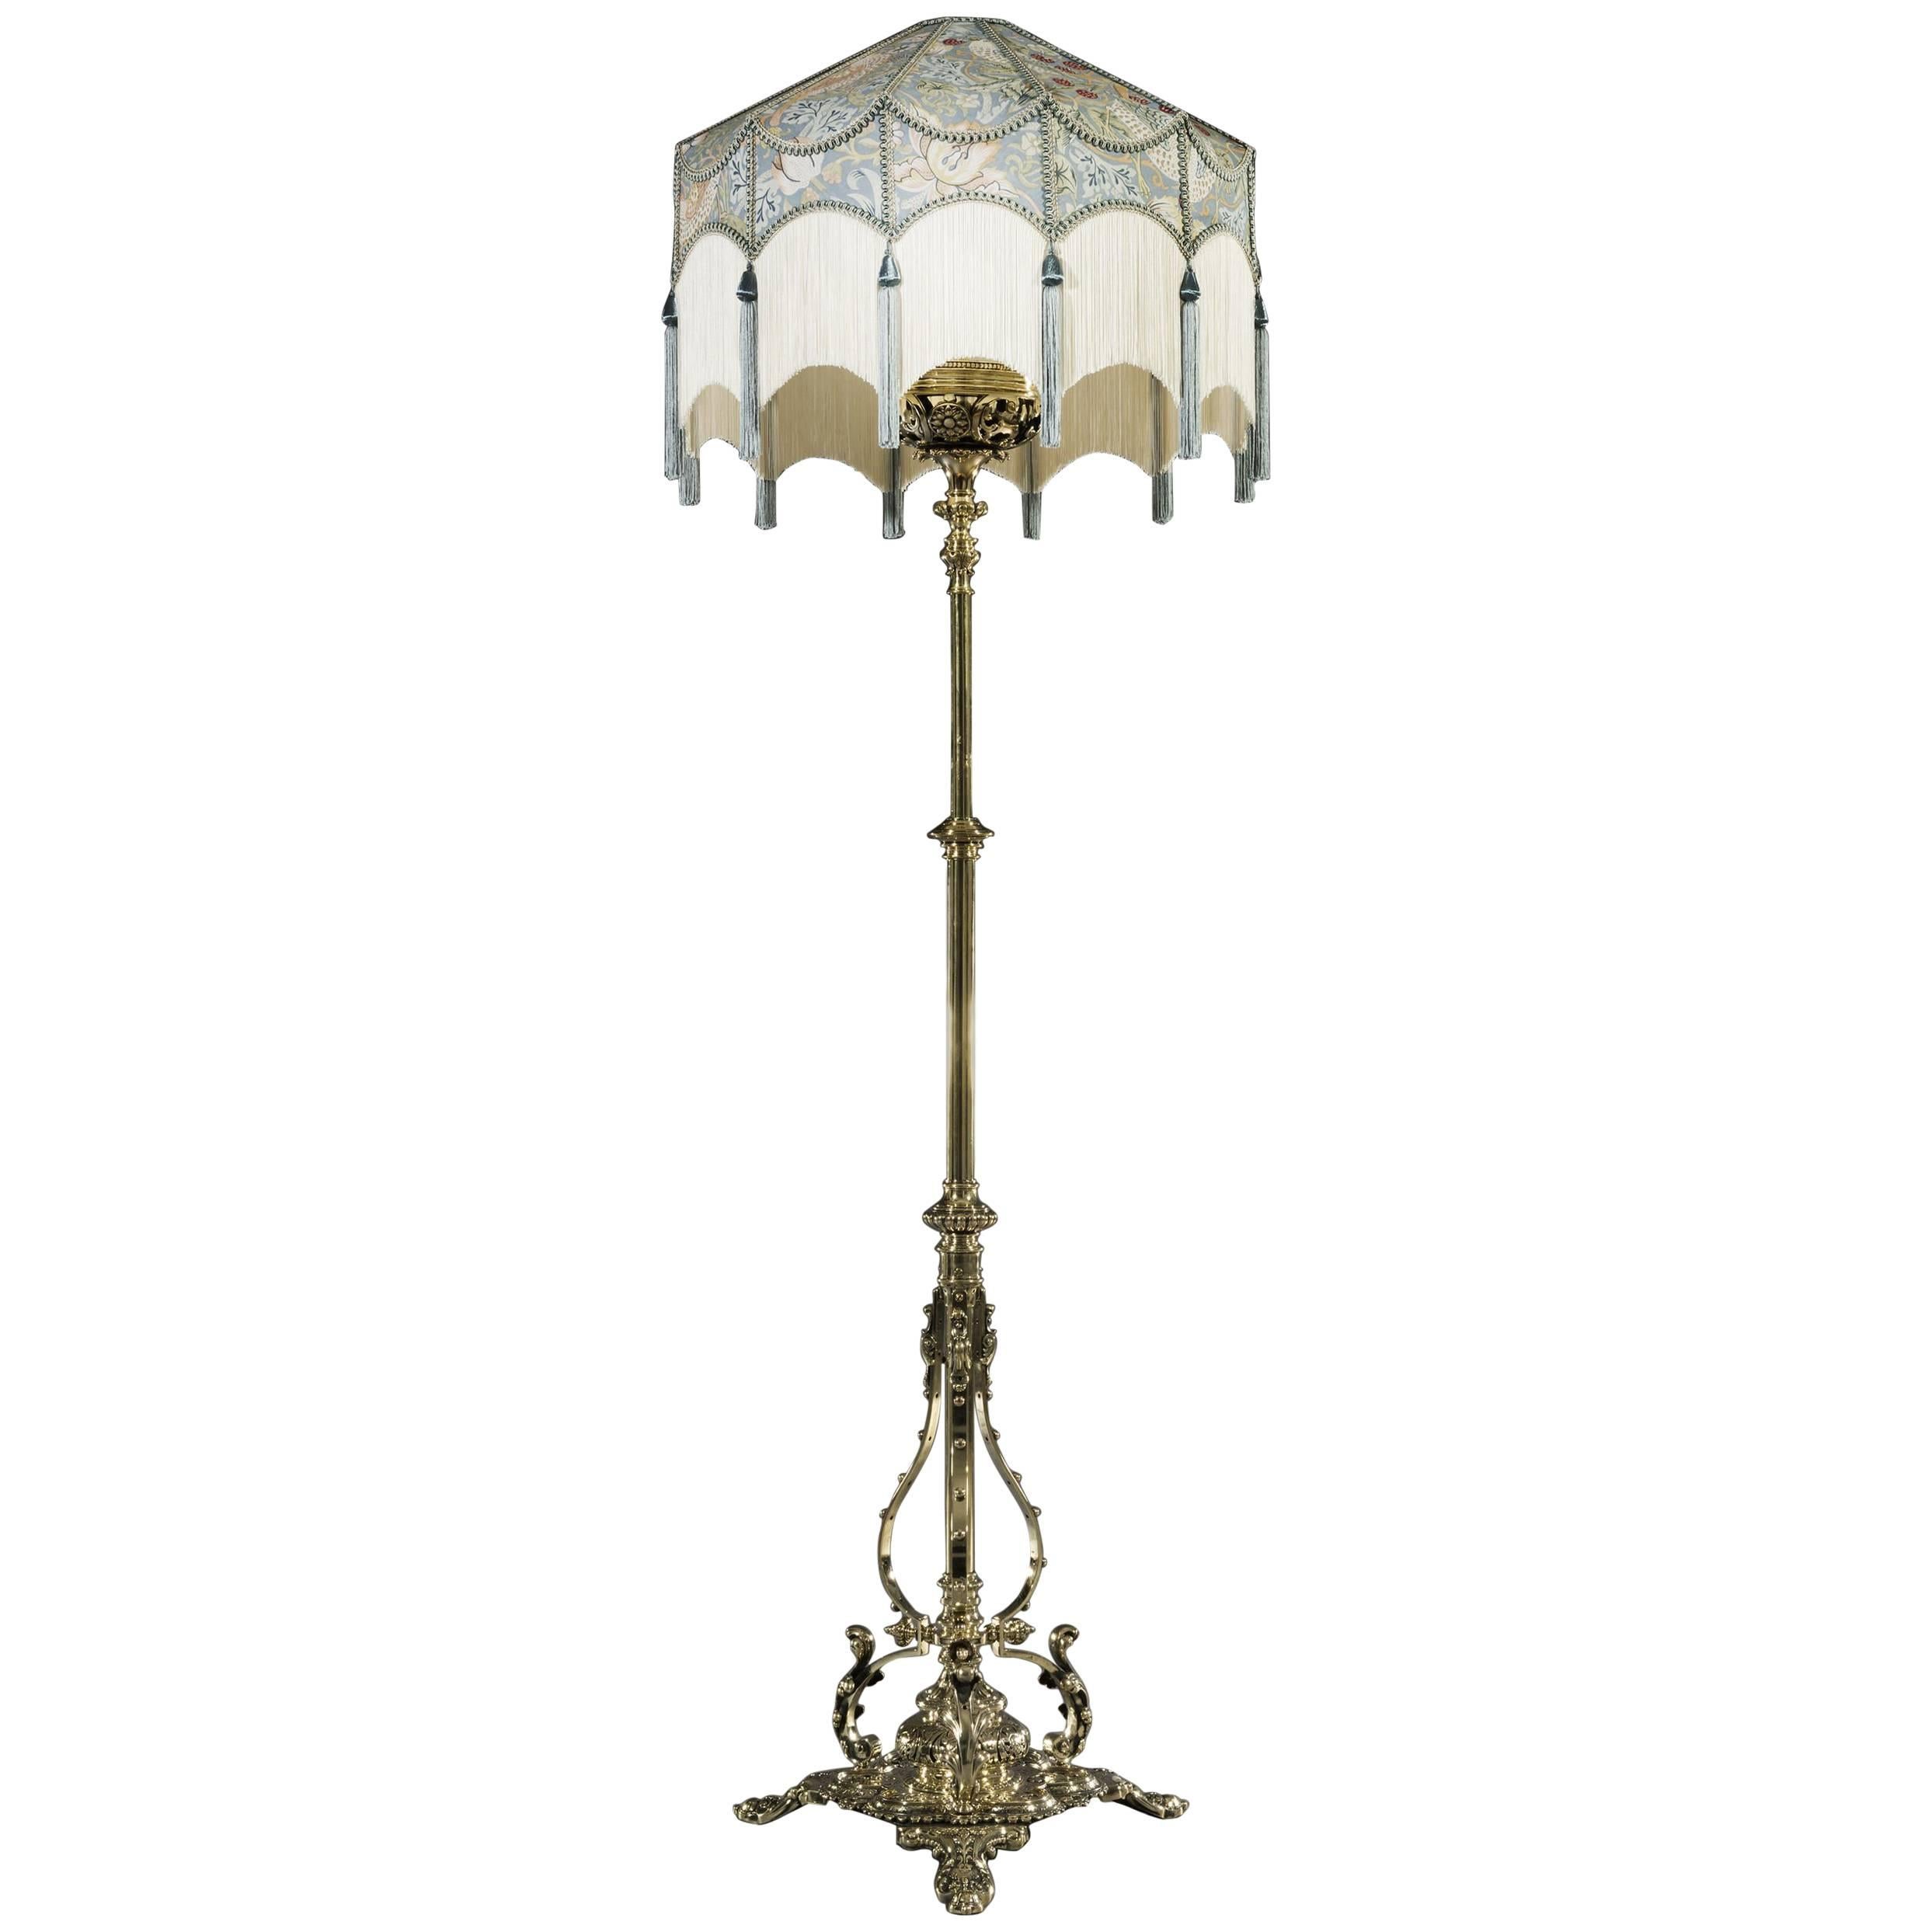 Victorian Period Extending Brass Oil Standard Lamp from the Aesthetic Movement